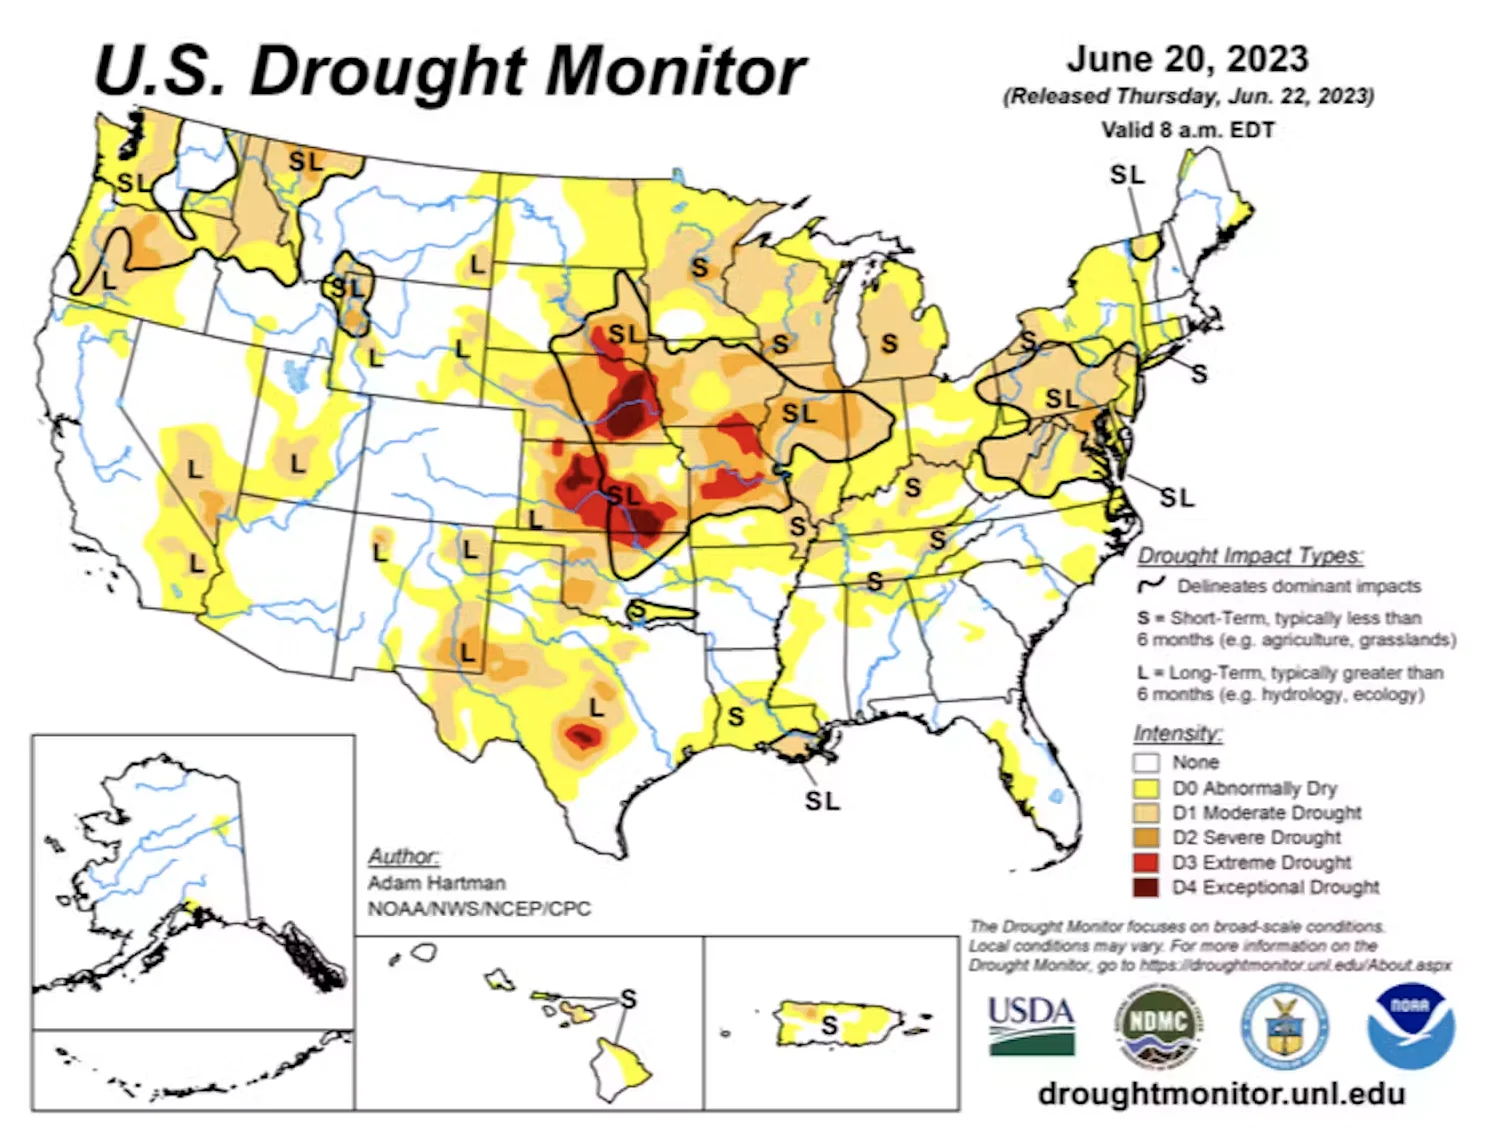 U.S. Drought Monitor via USDA: A developing flash drought in the central U.S. covered 64% of corn territory and 57% of soybean territory in late June 2023. Areas marked S are under short-term drought. U.S. Drought Monitor via USDA